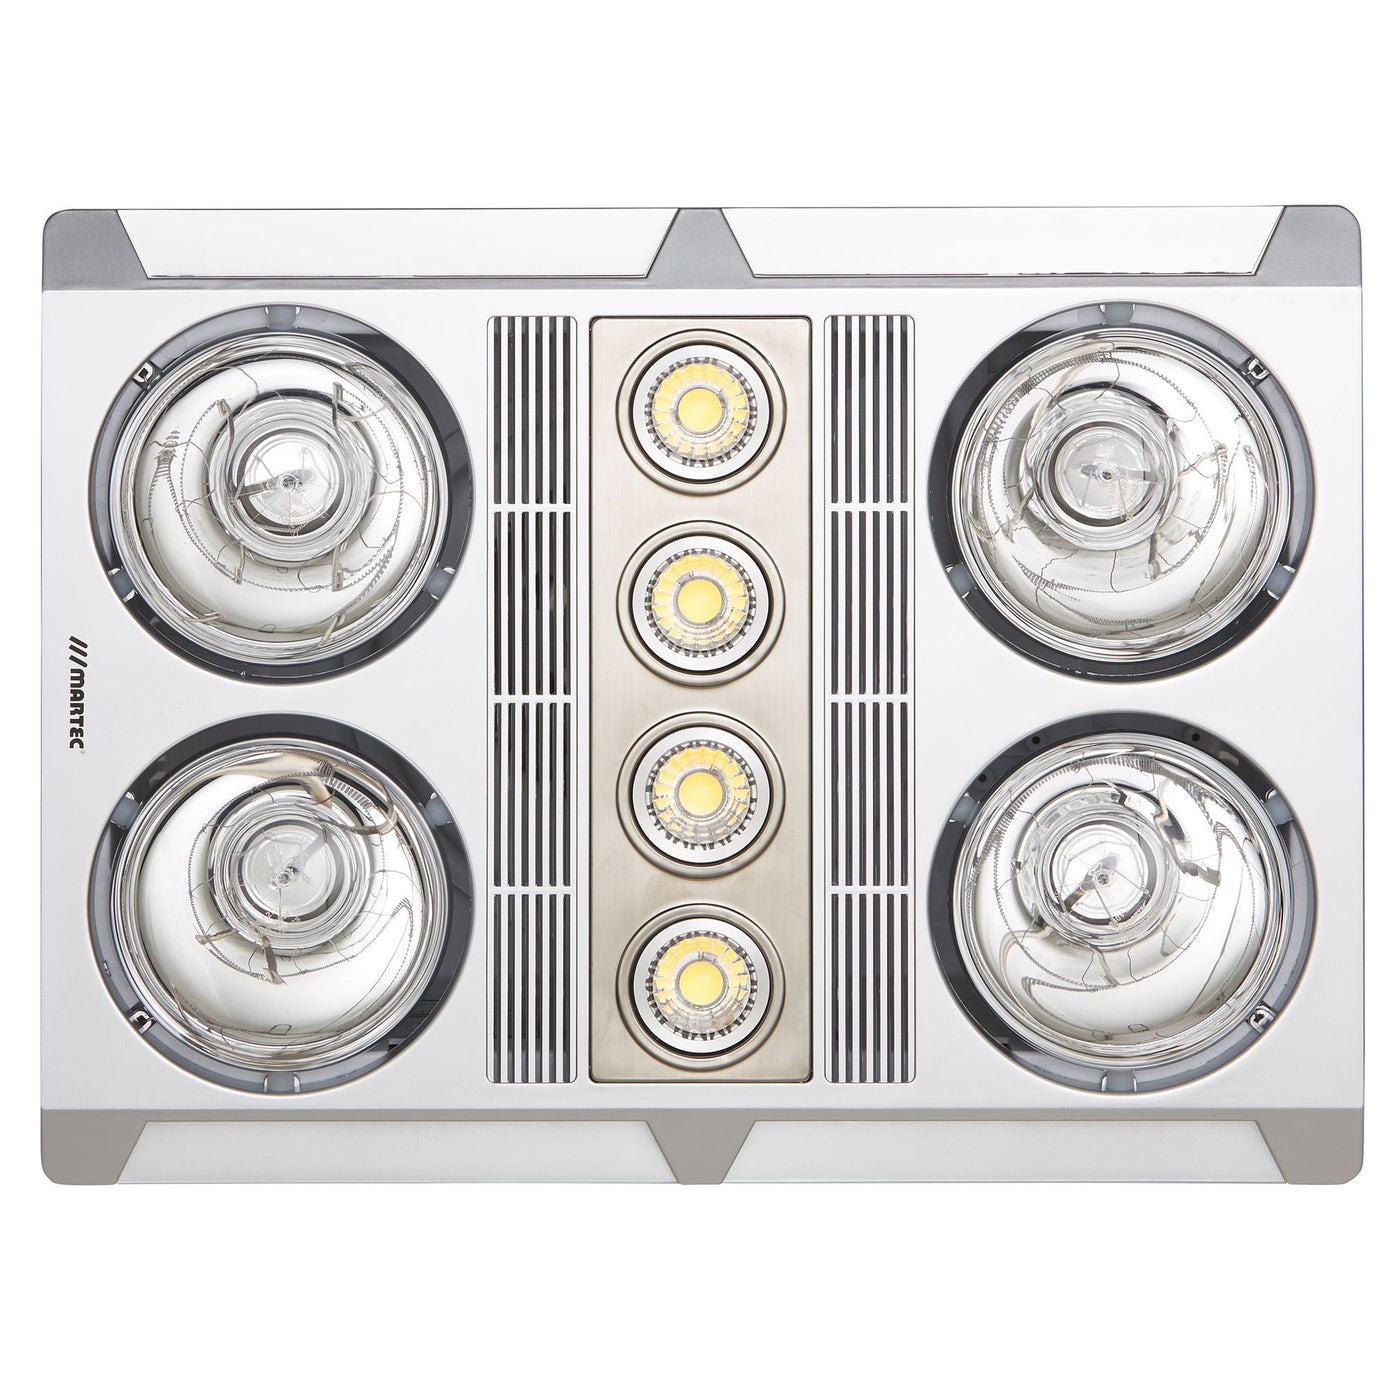 Martec Profile Plus 4 3-in-1 Bathroom Heater with 4 Heat Lamps, Exhaust Fan and GU10 LED Light